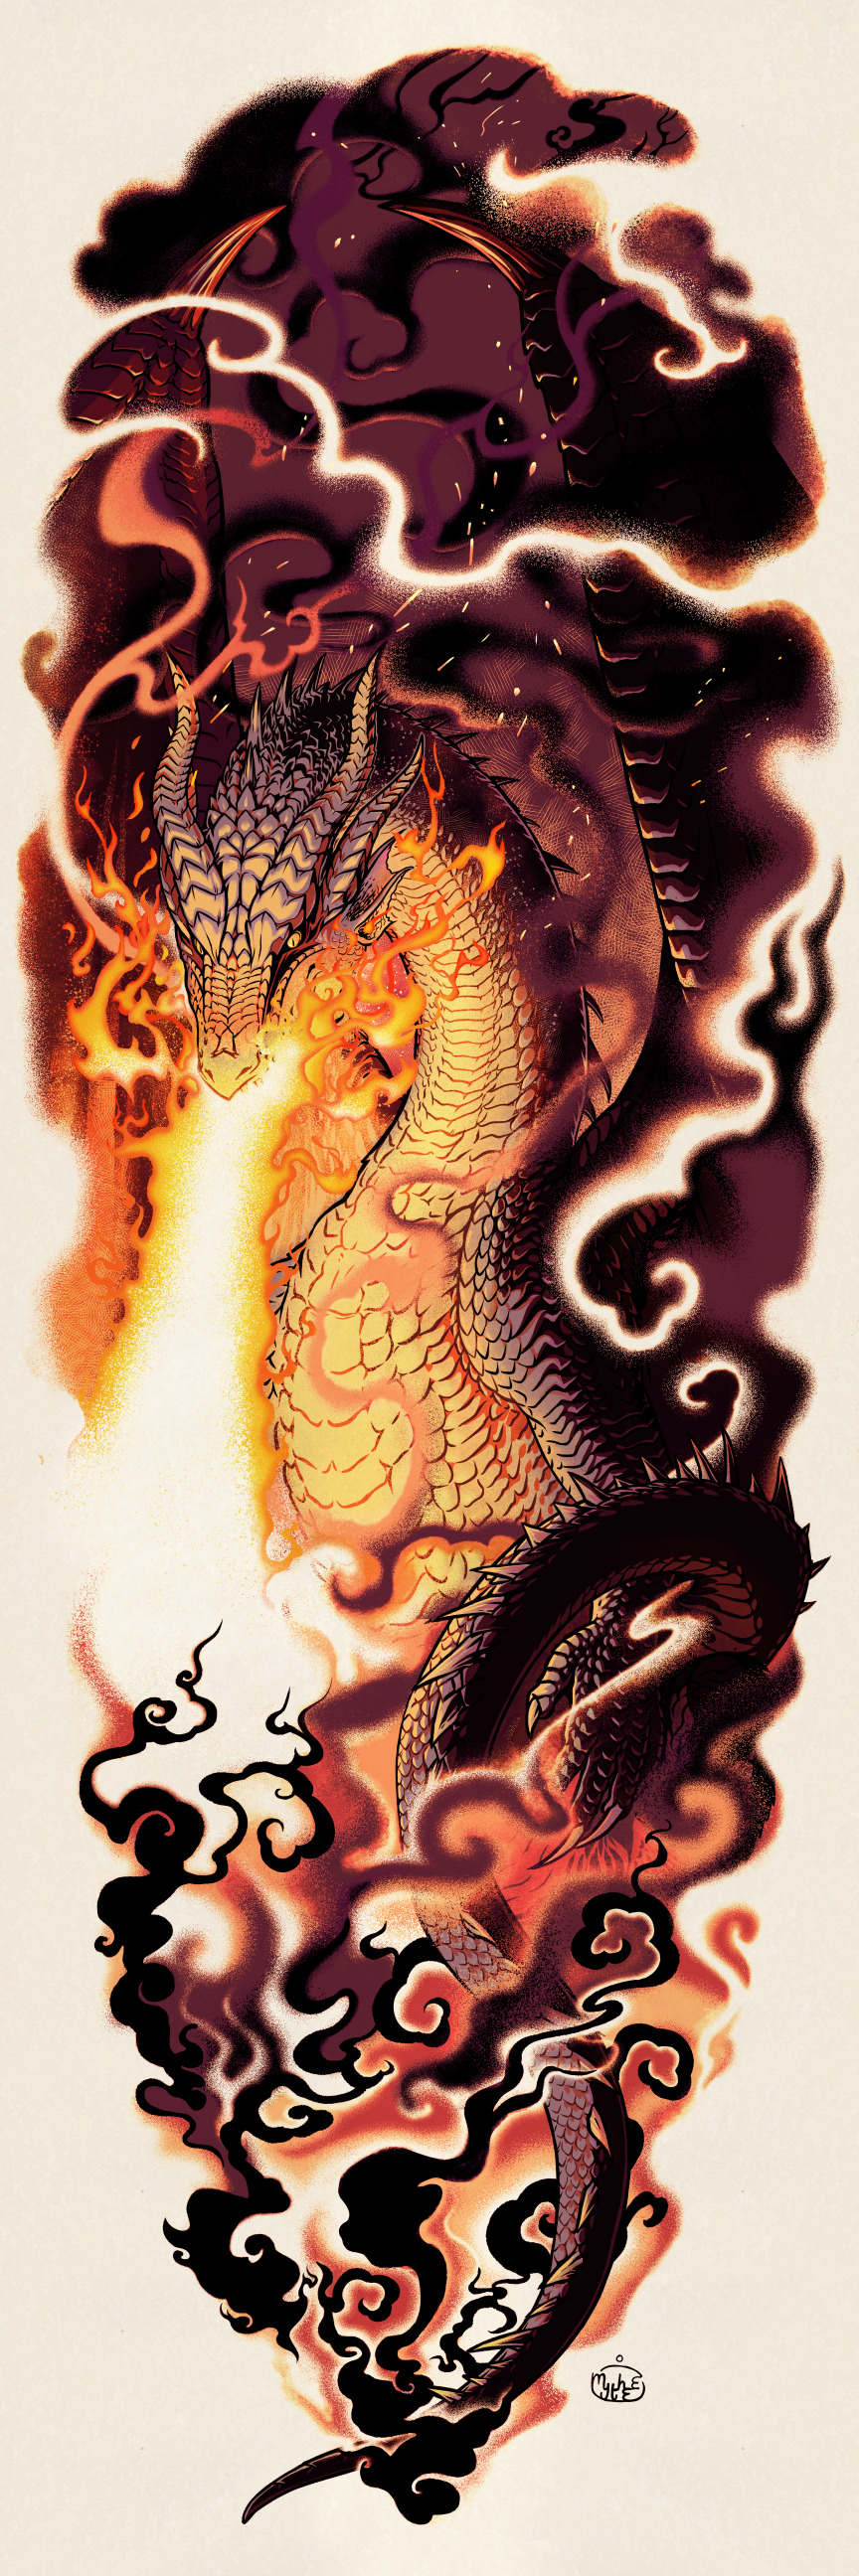 A commission for a Sleeve Tattoo design of Fatalis, an endgame dragon from Capcom's Monster Hunter franchise.